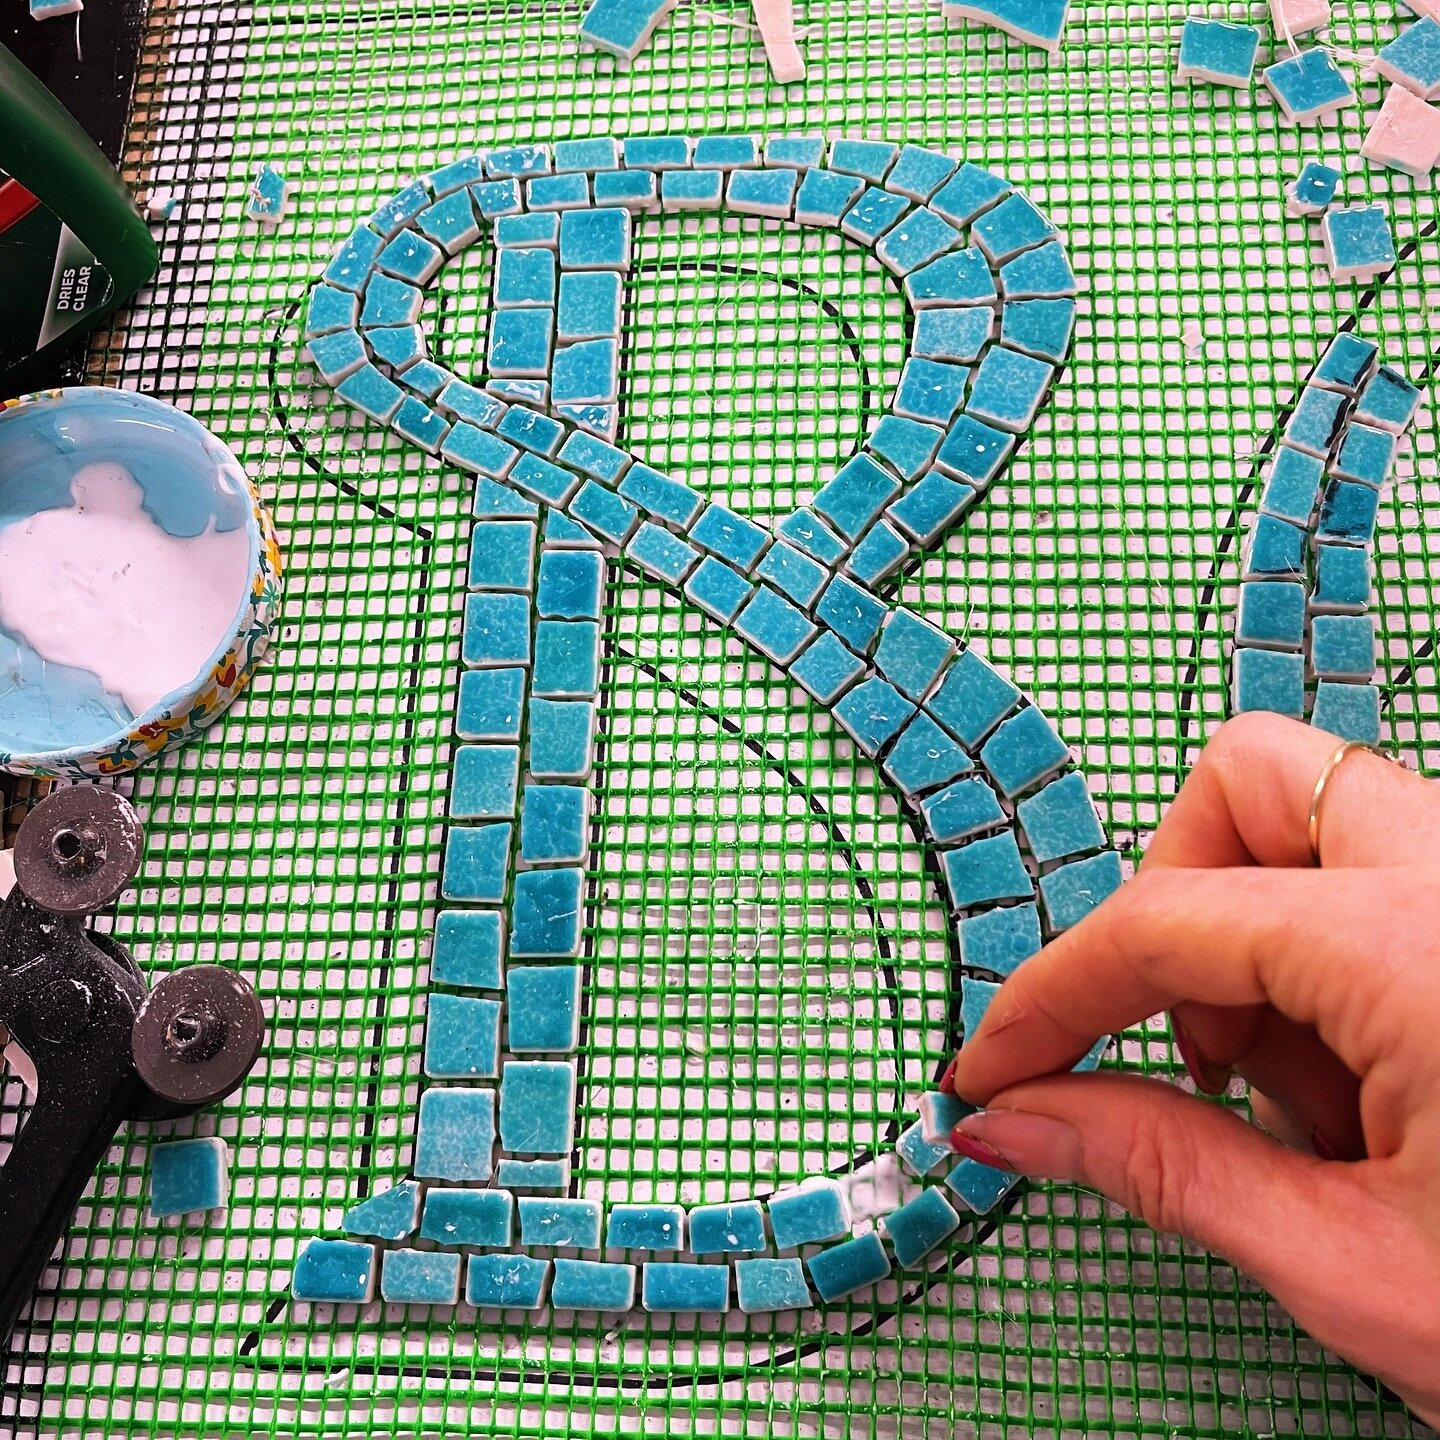 Working on a new mosaic with the lettering being inspired by Spanish signage. I wanted the tiles to intersect the stem of the letter to add a nice flow to the mosaic. I stick the hand cut mosaic tiles onto fibreglass mesh with regular wood glue. And 